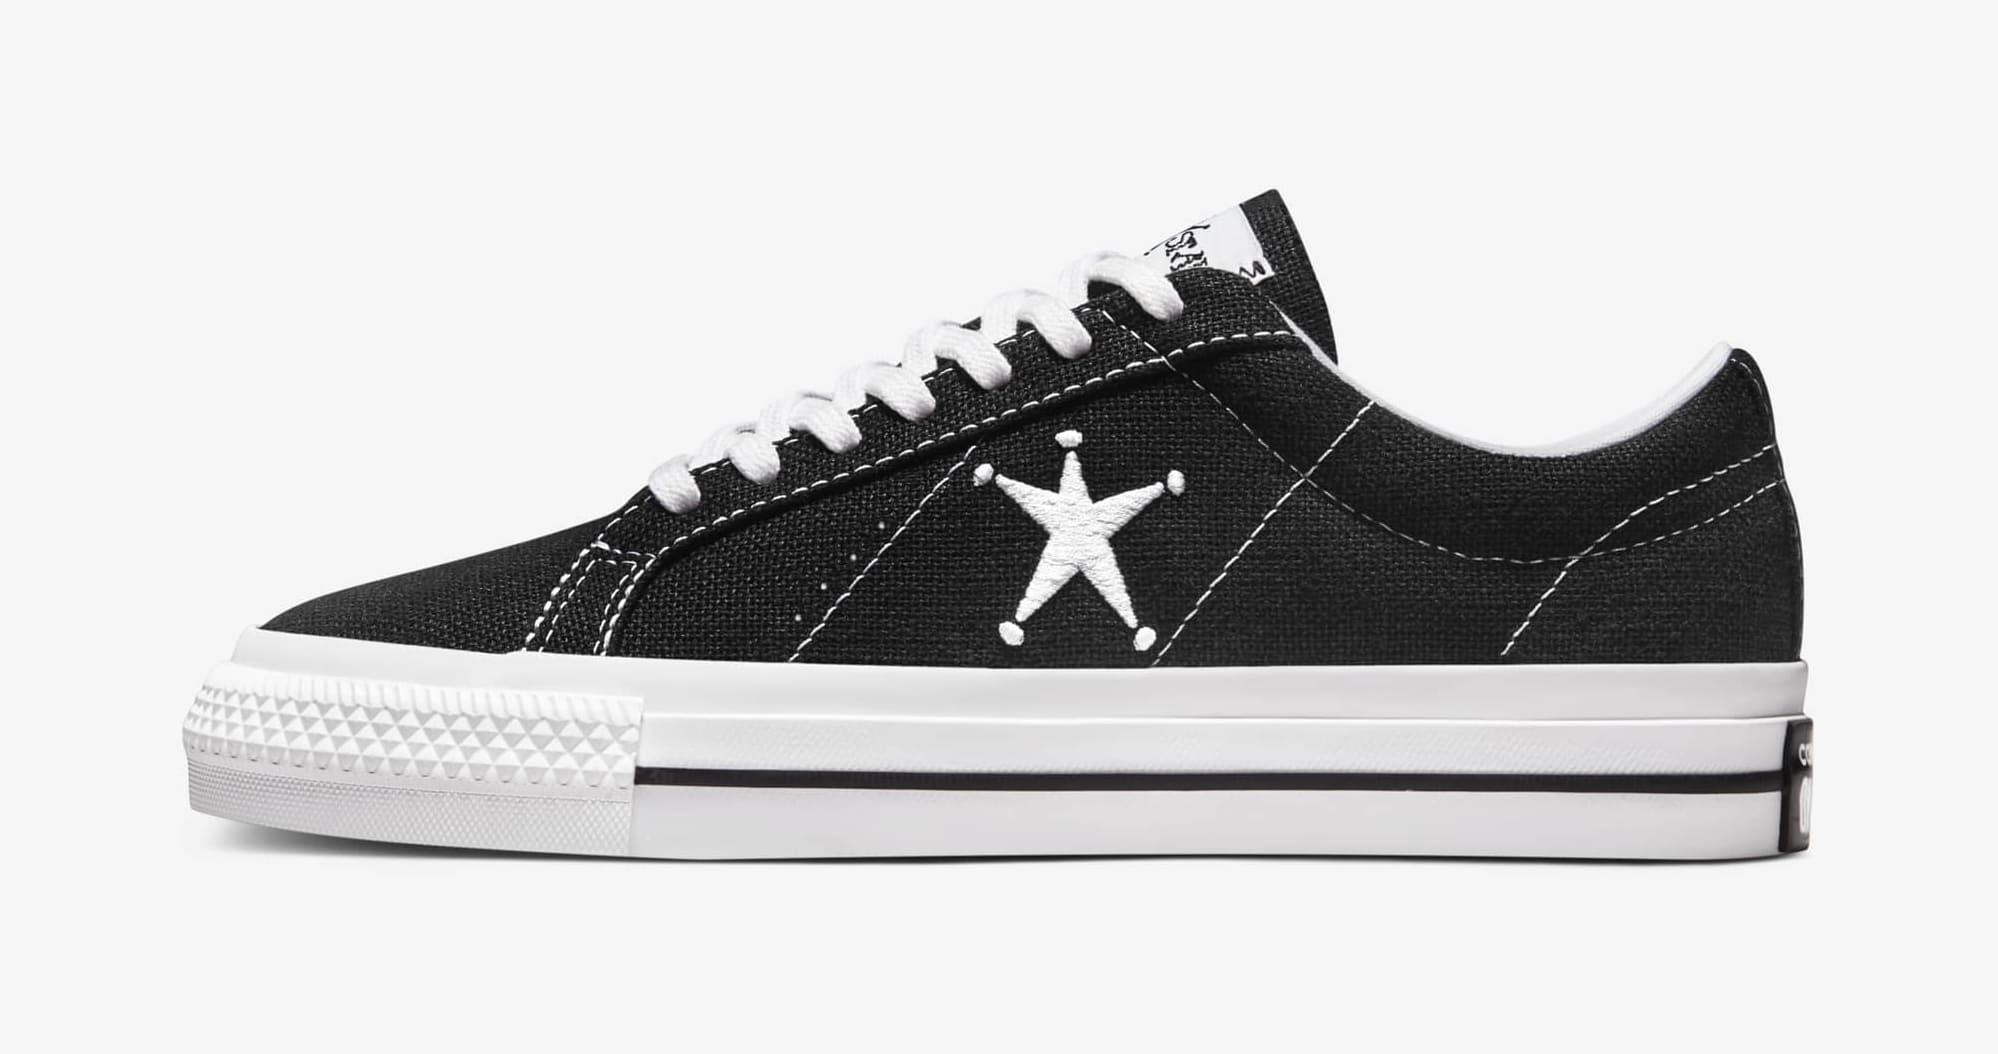 Stussy x Converse One Star Lateral